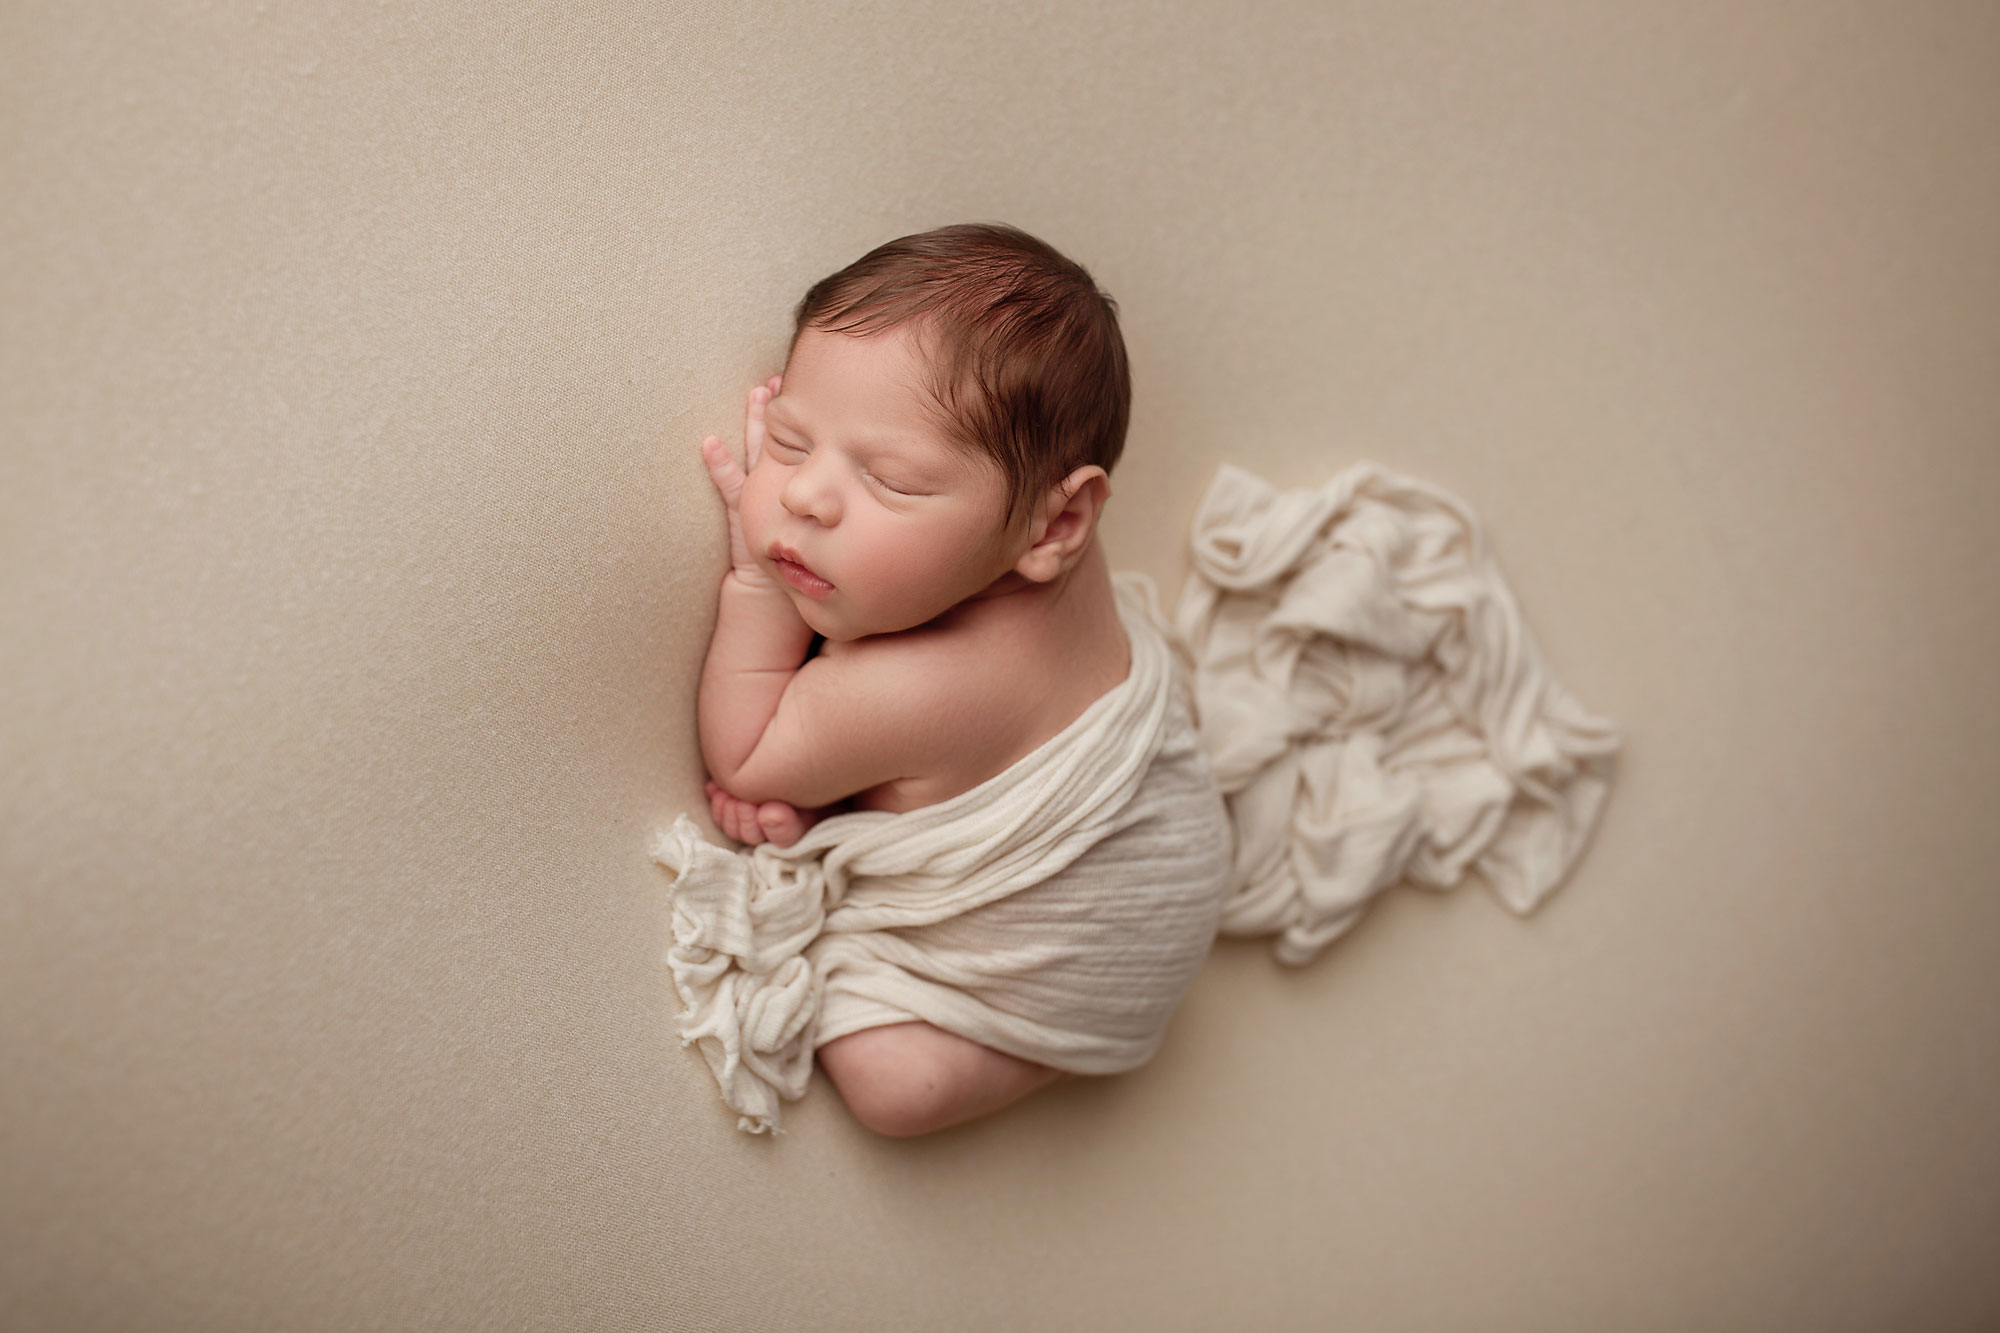 Learn how to photograph your own baby